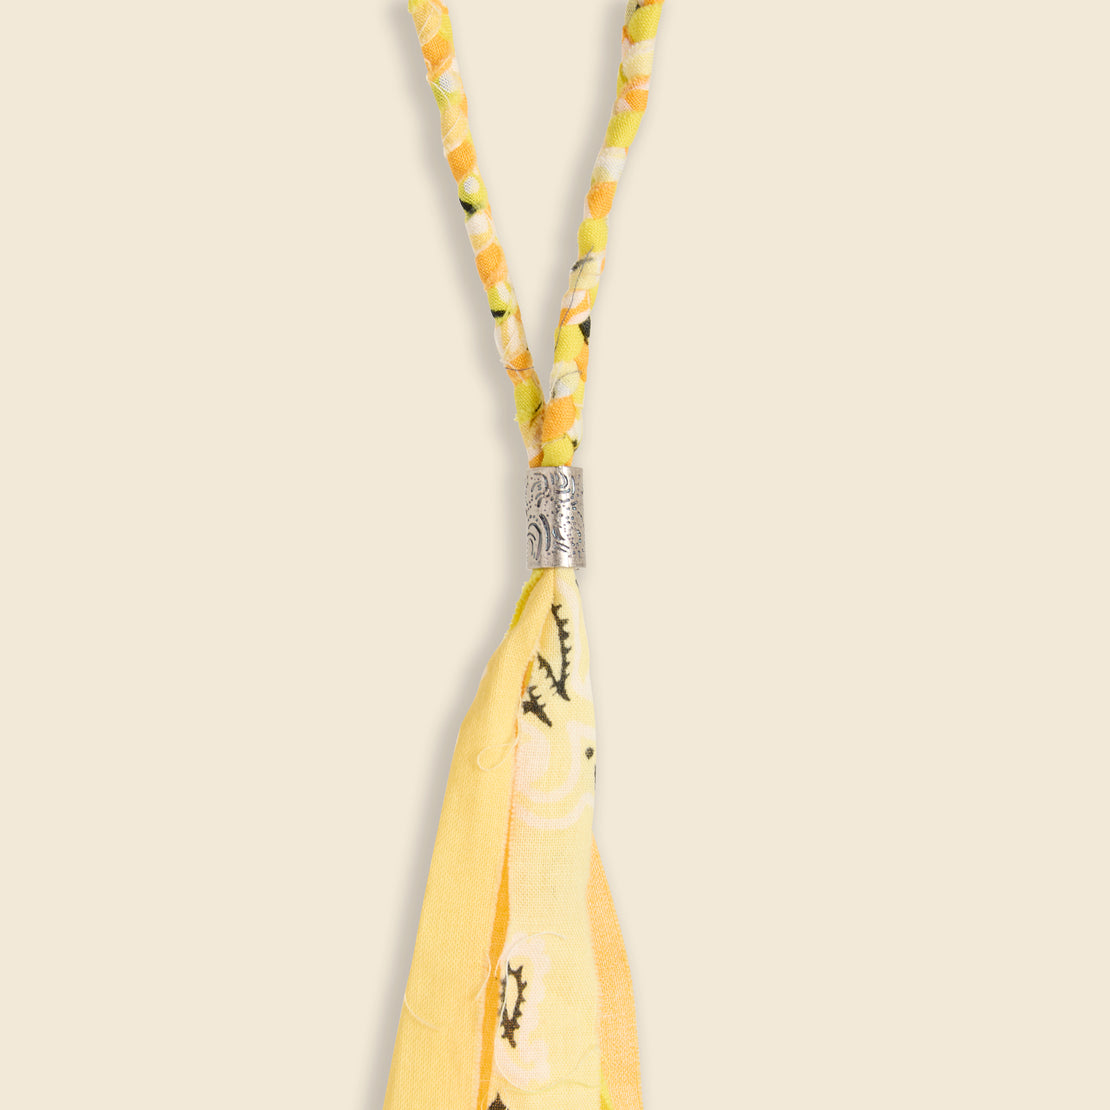 Bandana Fringe Necklace - Yellow - Kapital - STAG Provisions - W - Accessories - Necklace